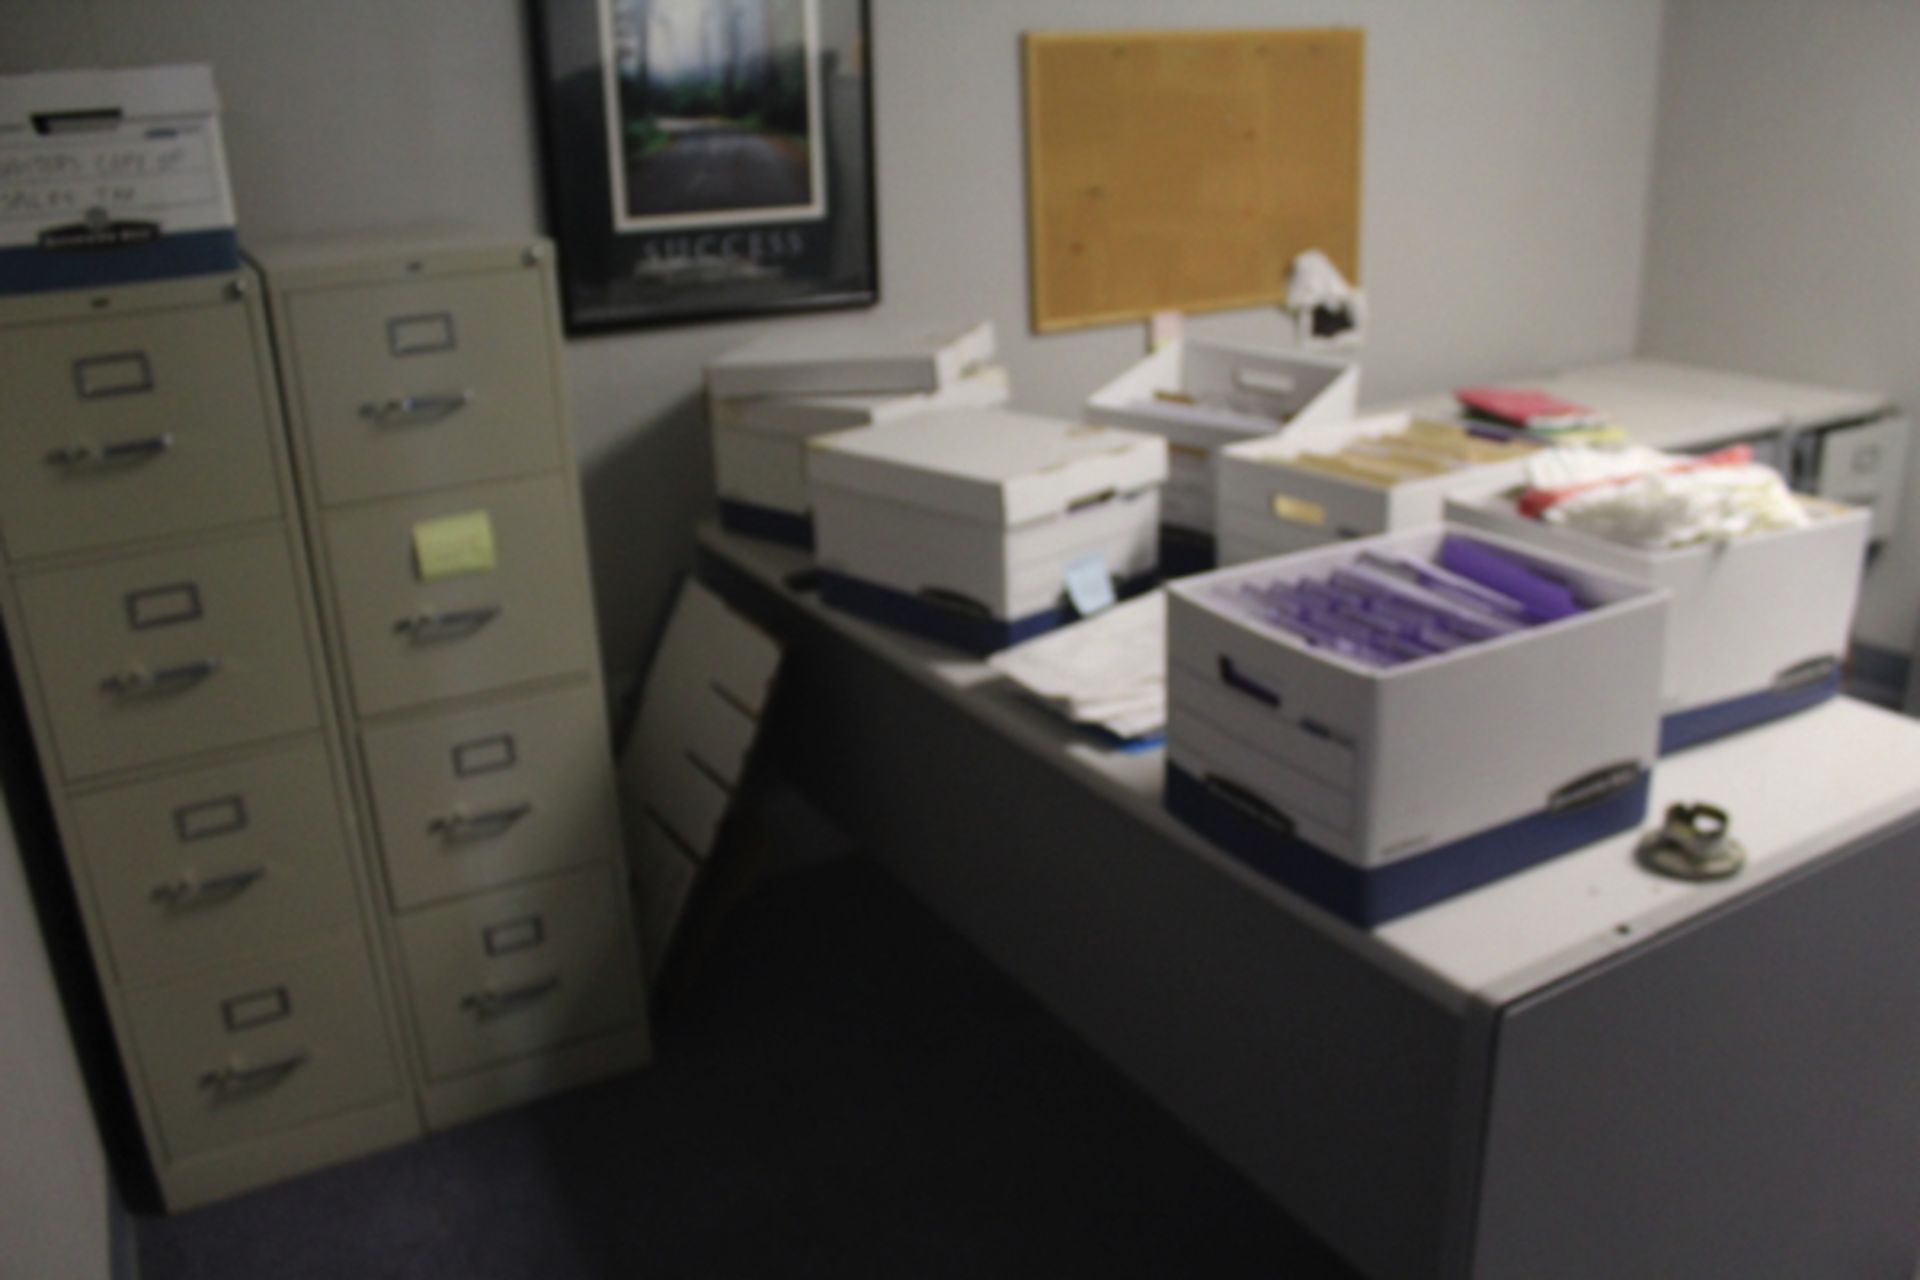 Contents of Office | Location: Administration Building - Image 2 of 3